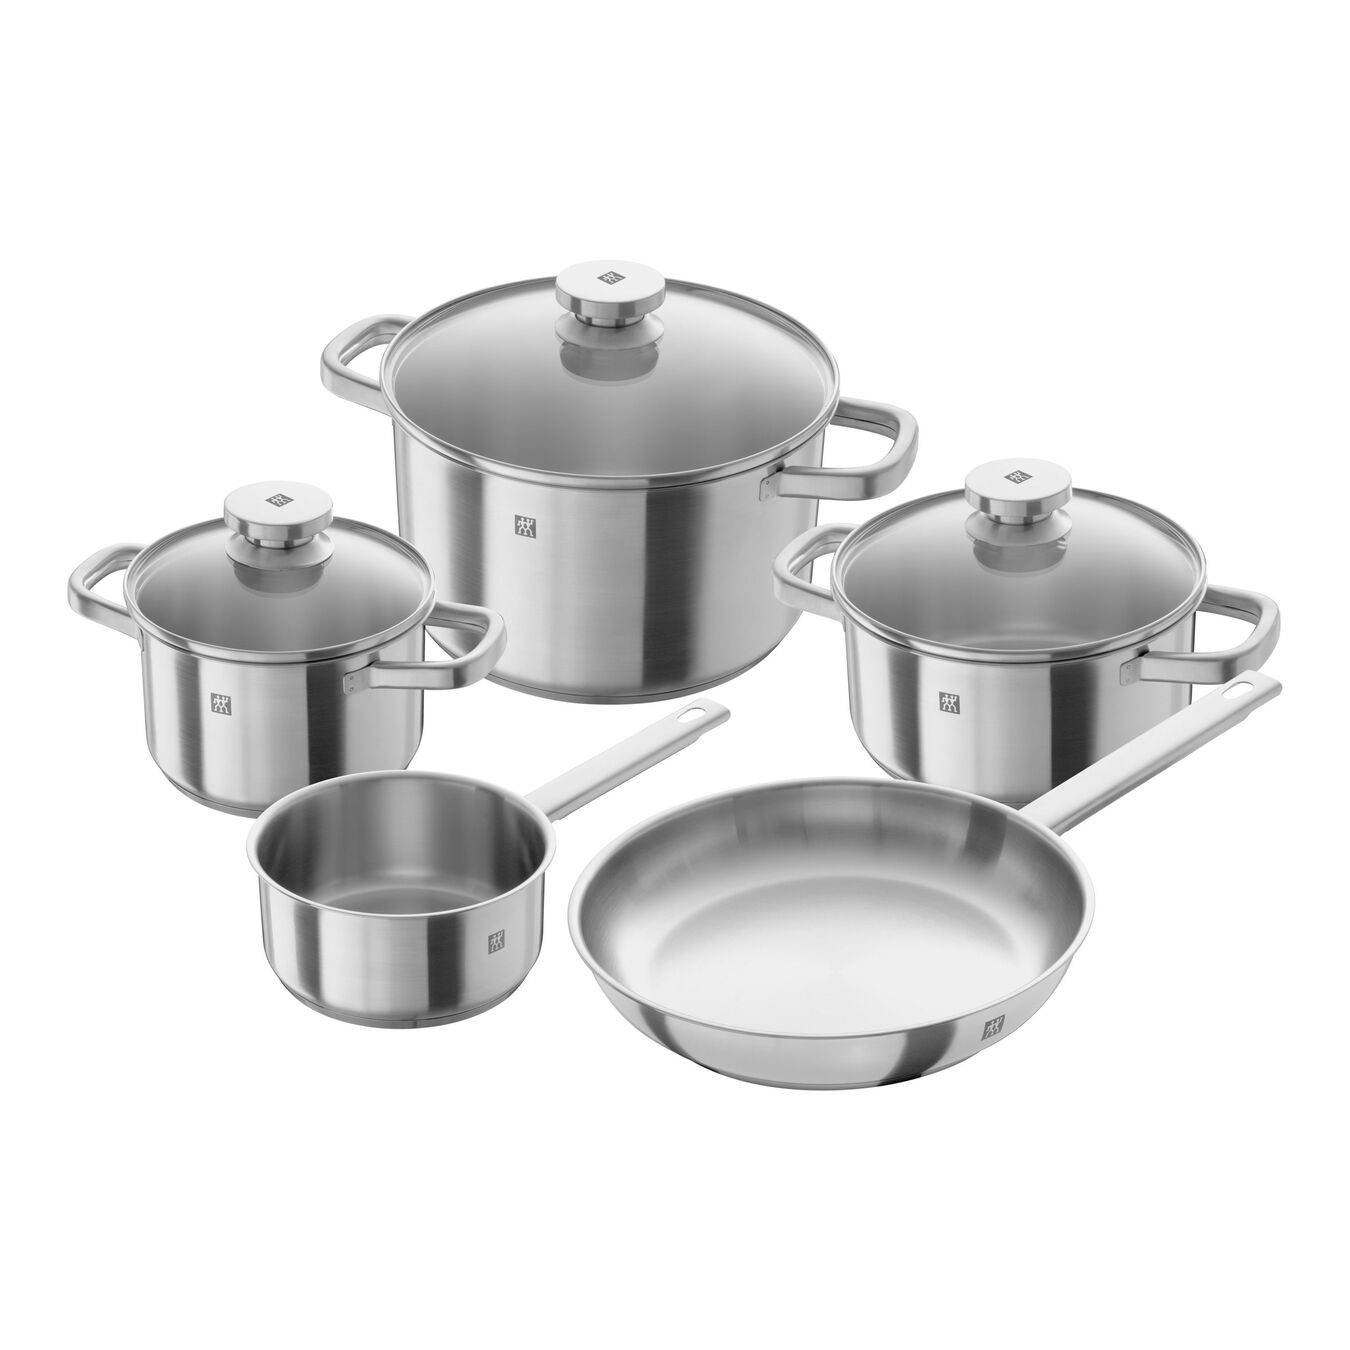 5-pcs 18/10 Stainless Steel Pot set silver,,large 1